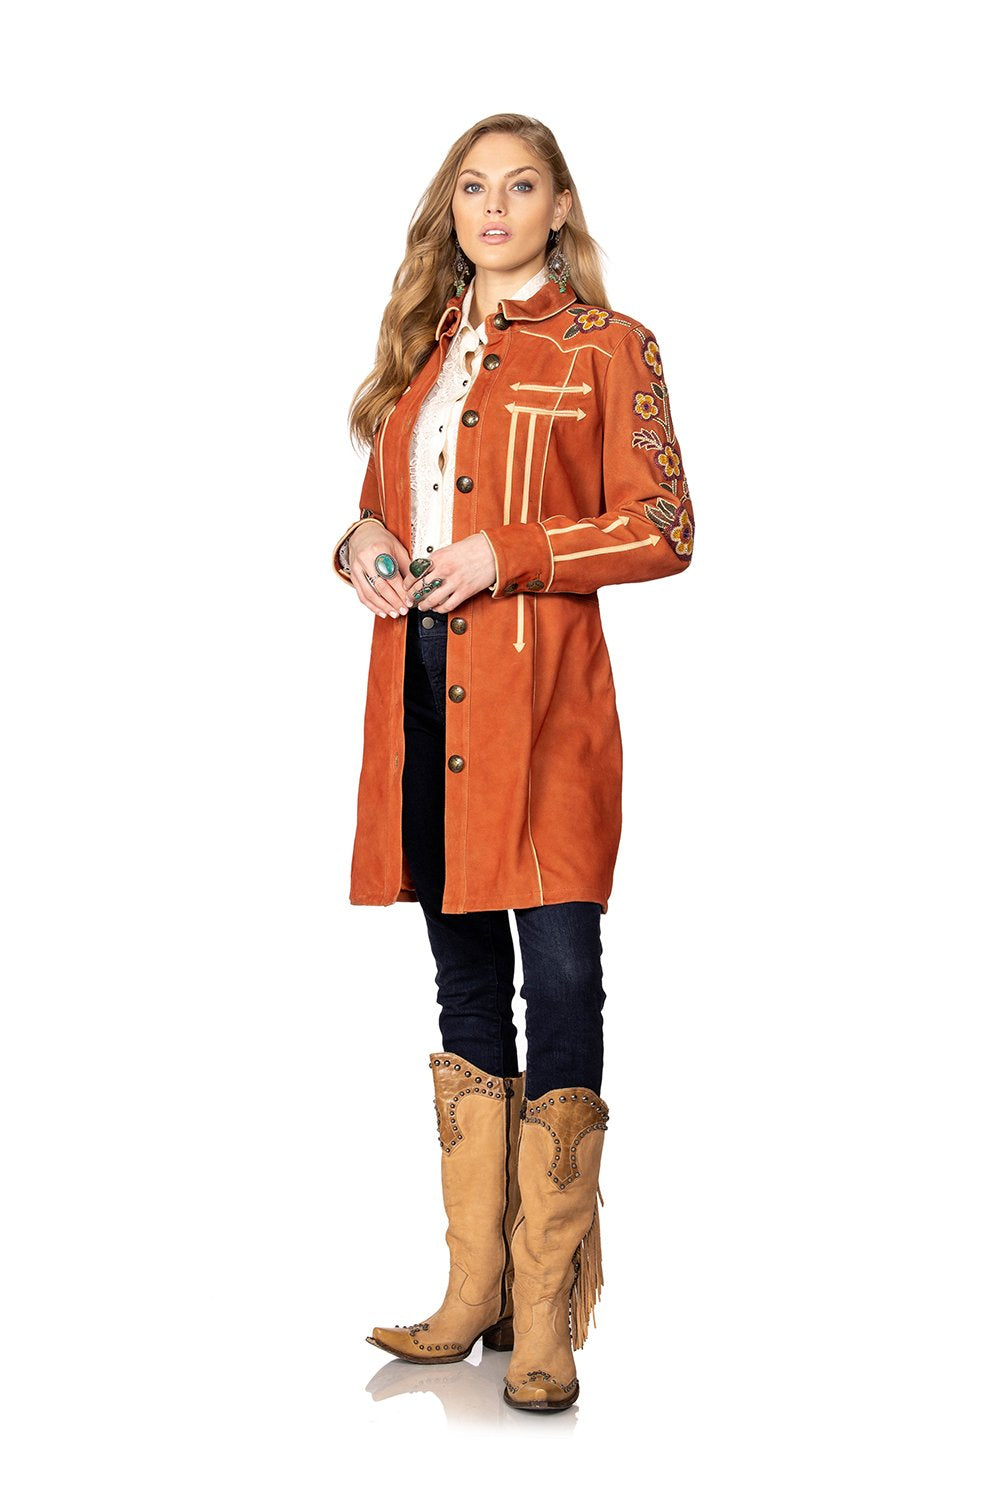 Double D Ranch North Platte Coat in Shasta 6Whiskey C2720 Cody Fall collection 2020 